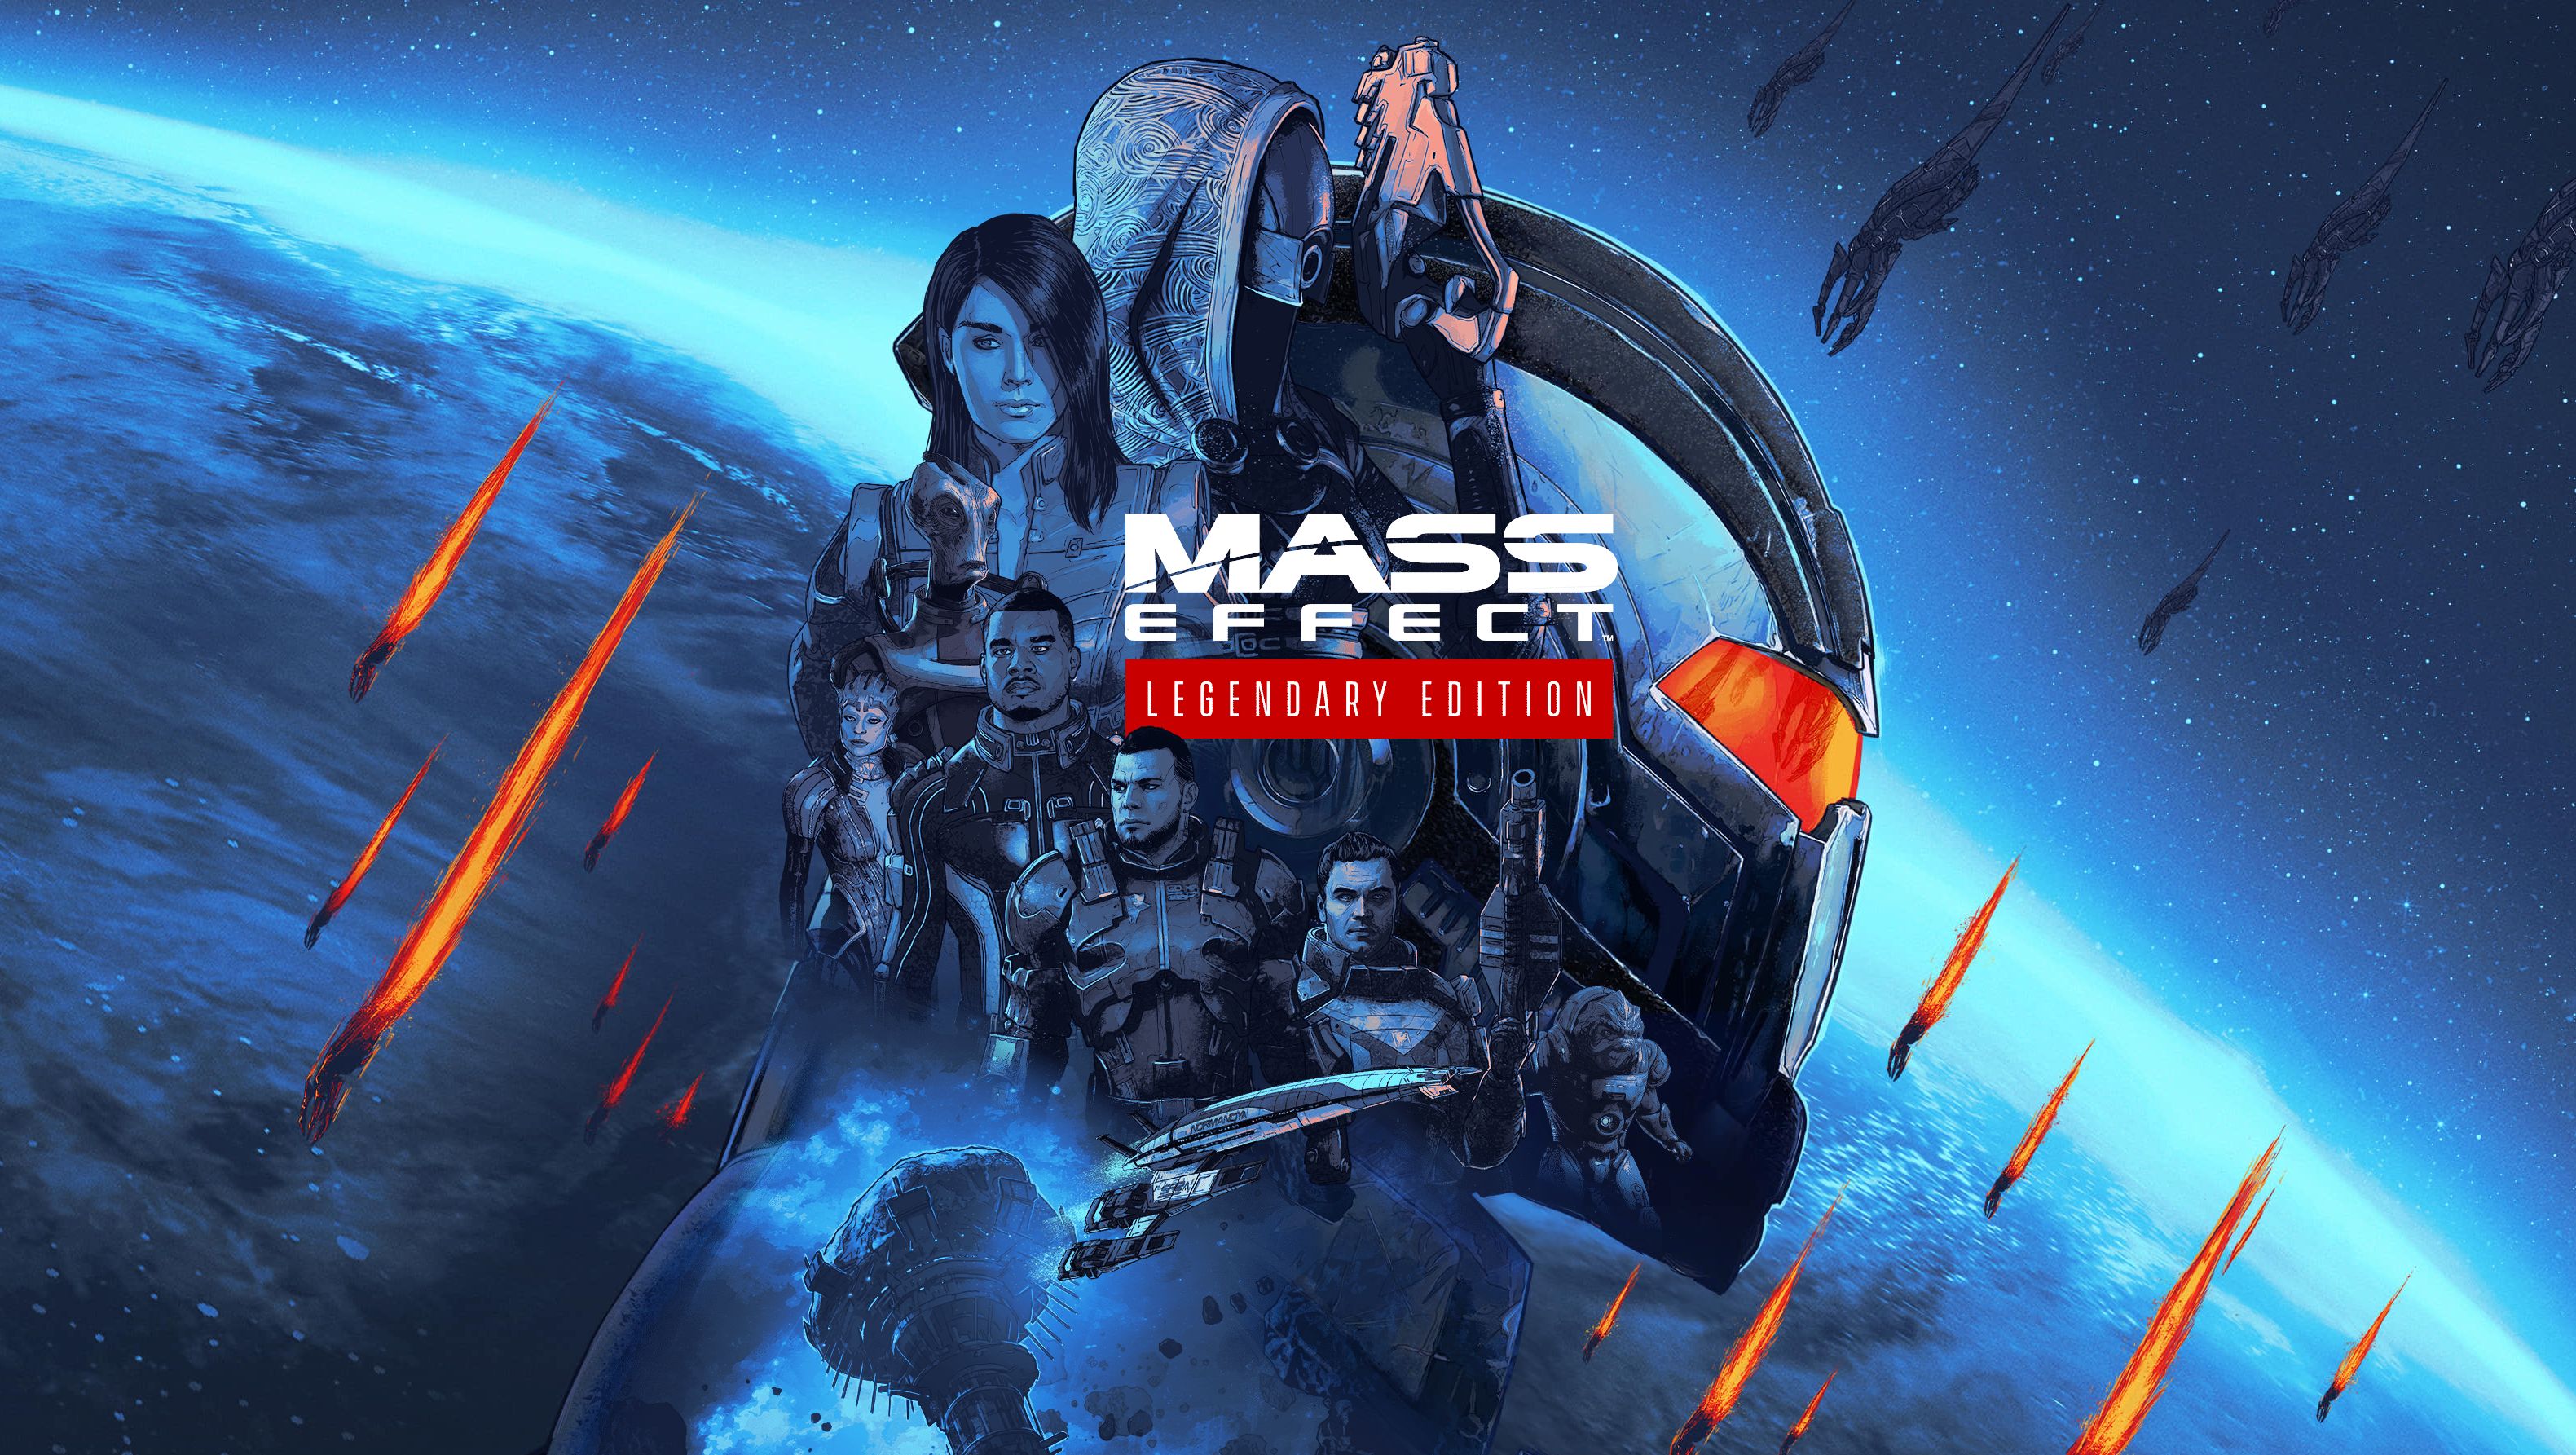 Image for Amazon is handing out Mass Effect Legendary Edition, Grid Legends, and more free games for Prime Day